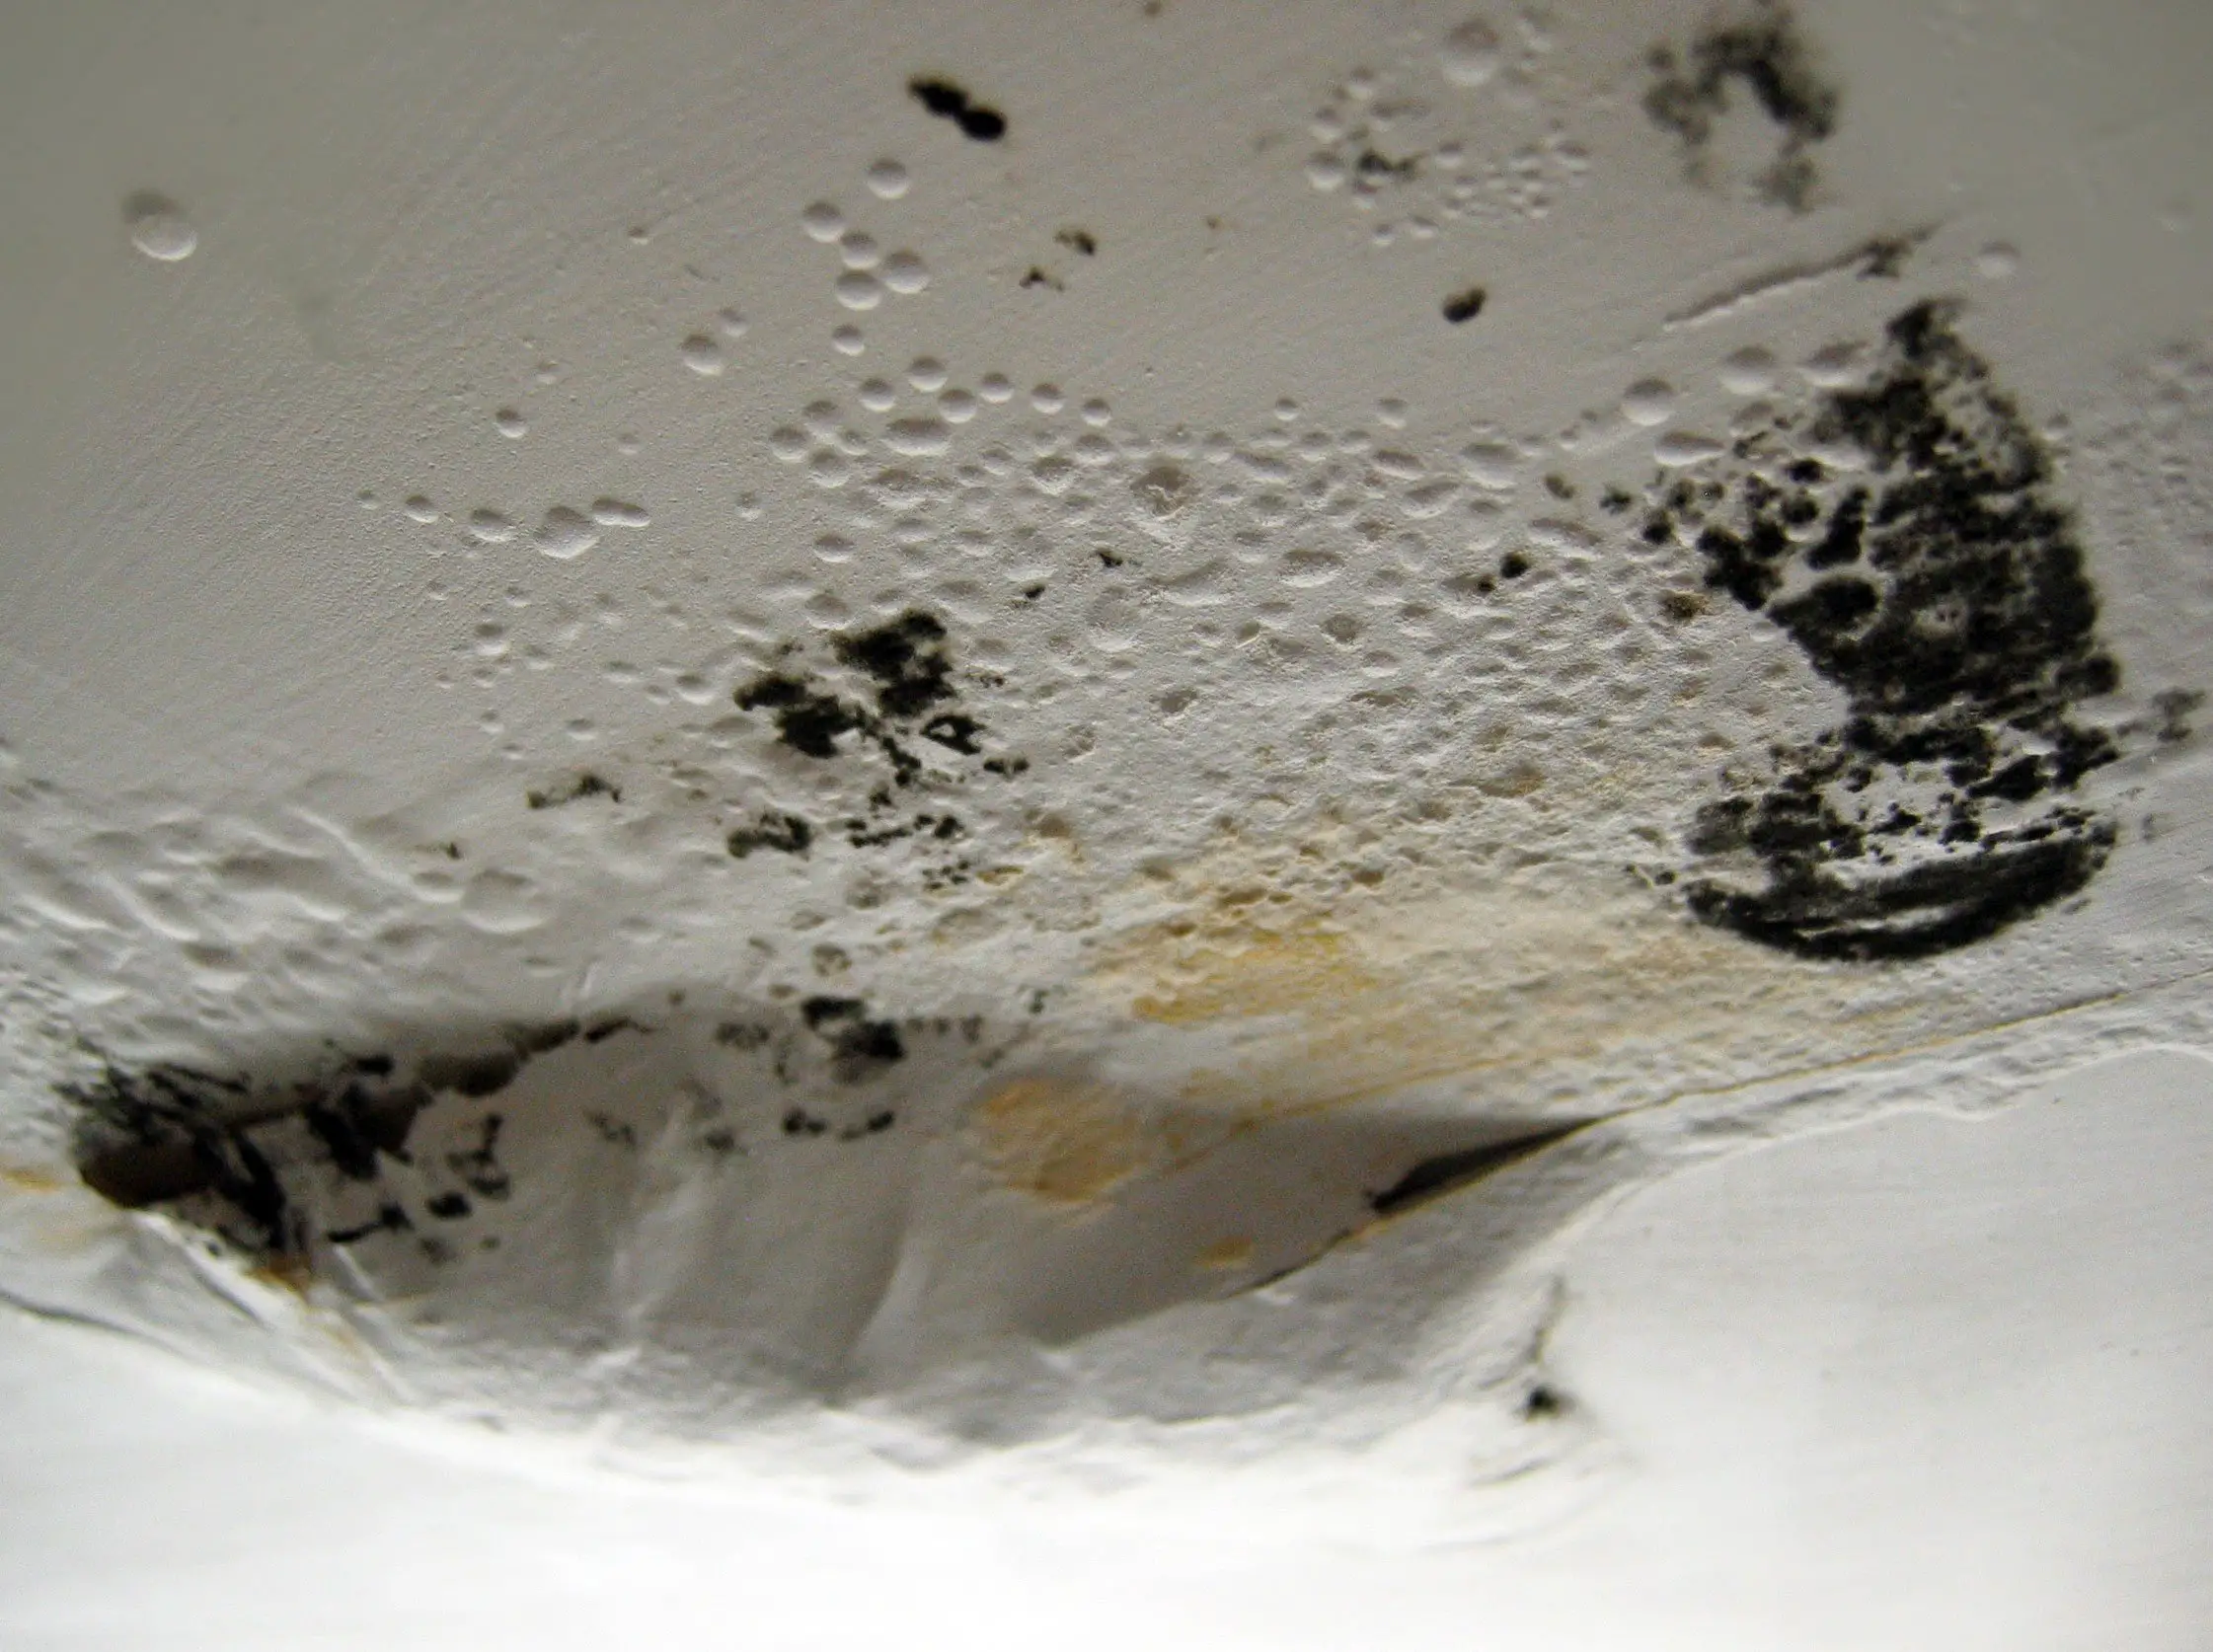 Toxic Black Mold  Everything You Need to Know